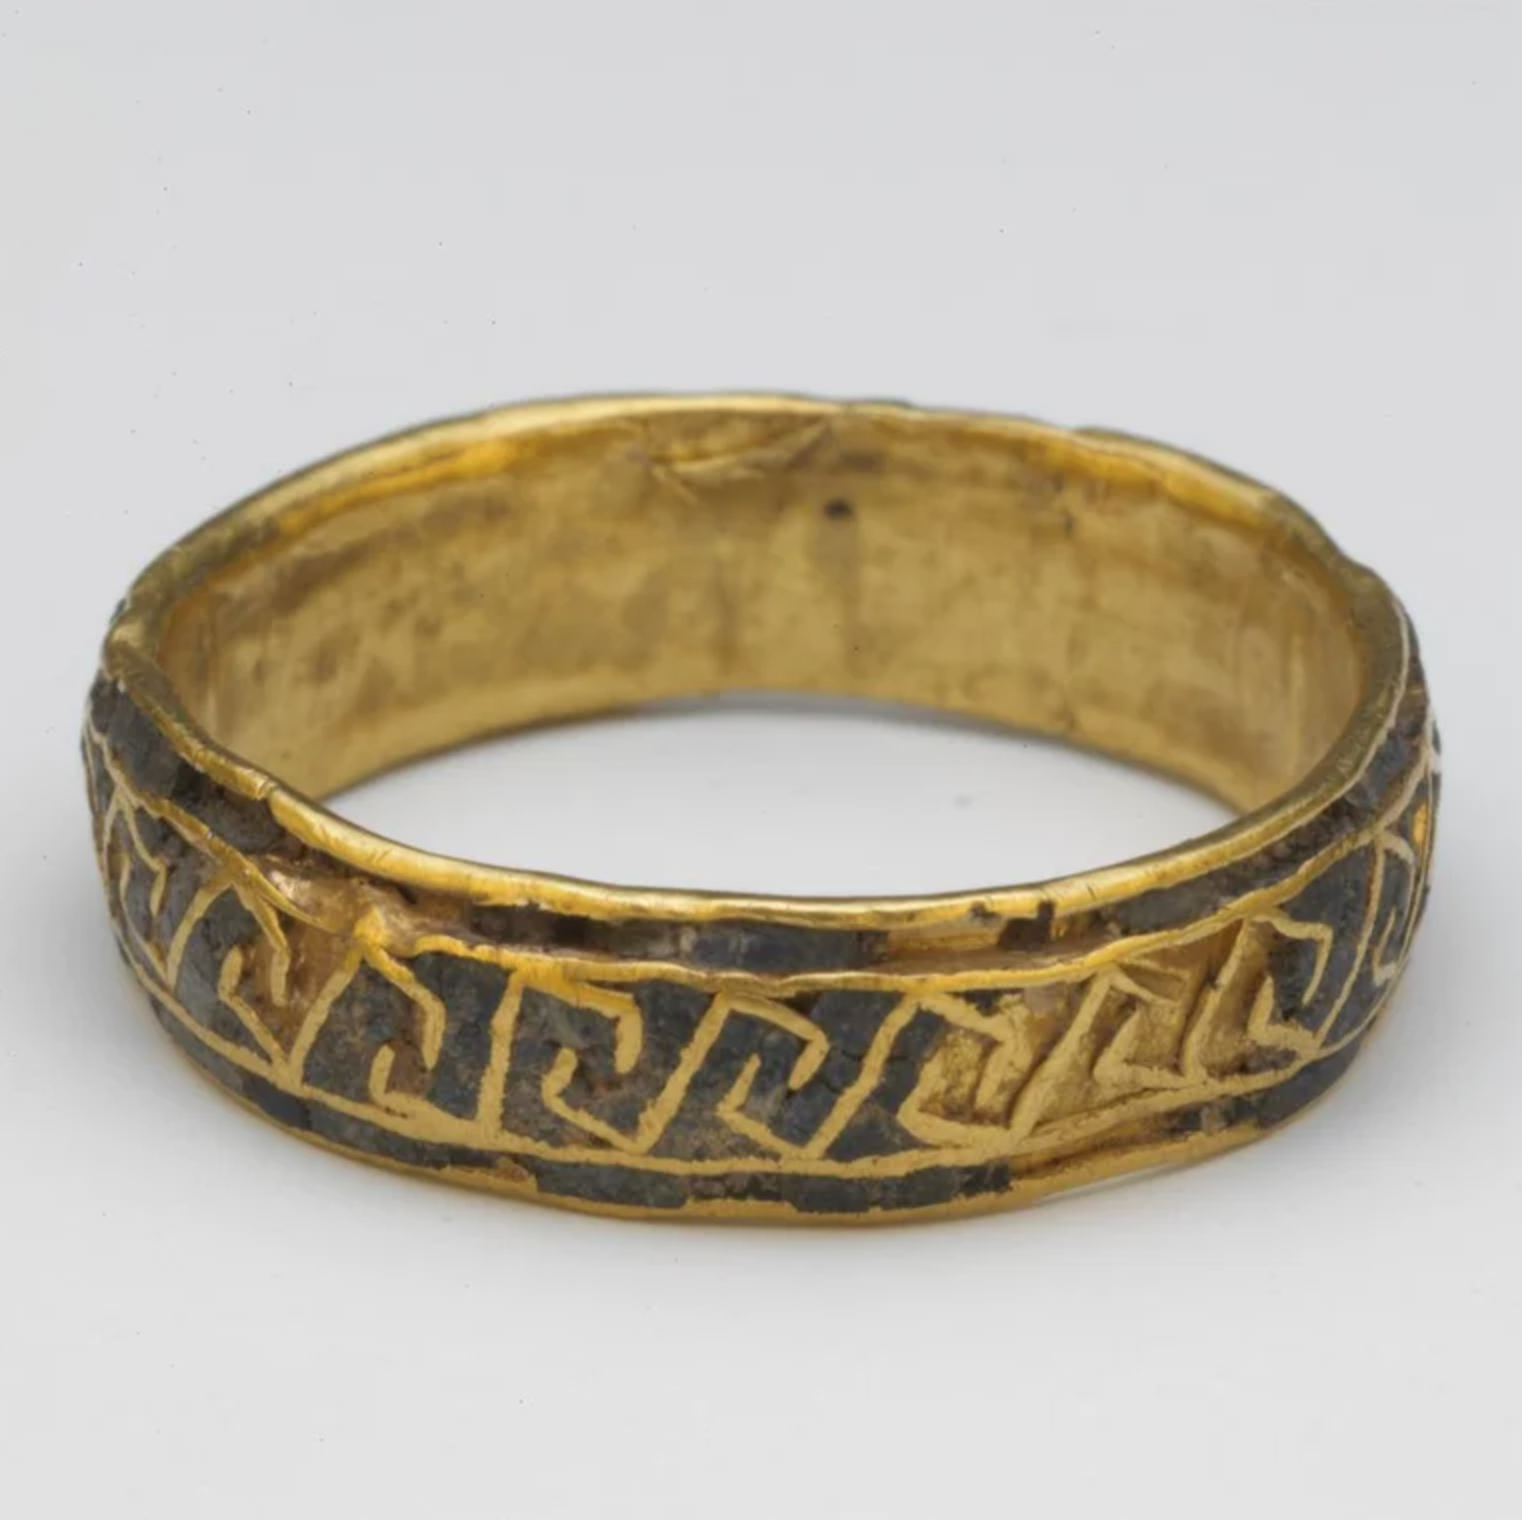 fascinating artifacts - Gold and enamel ring from Hungary